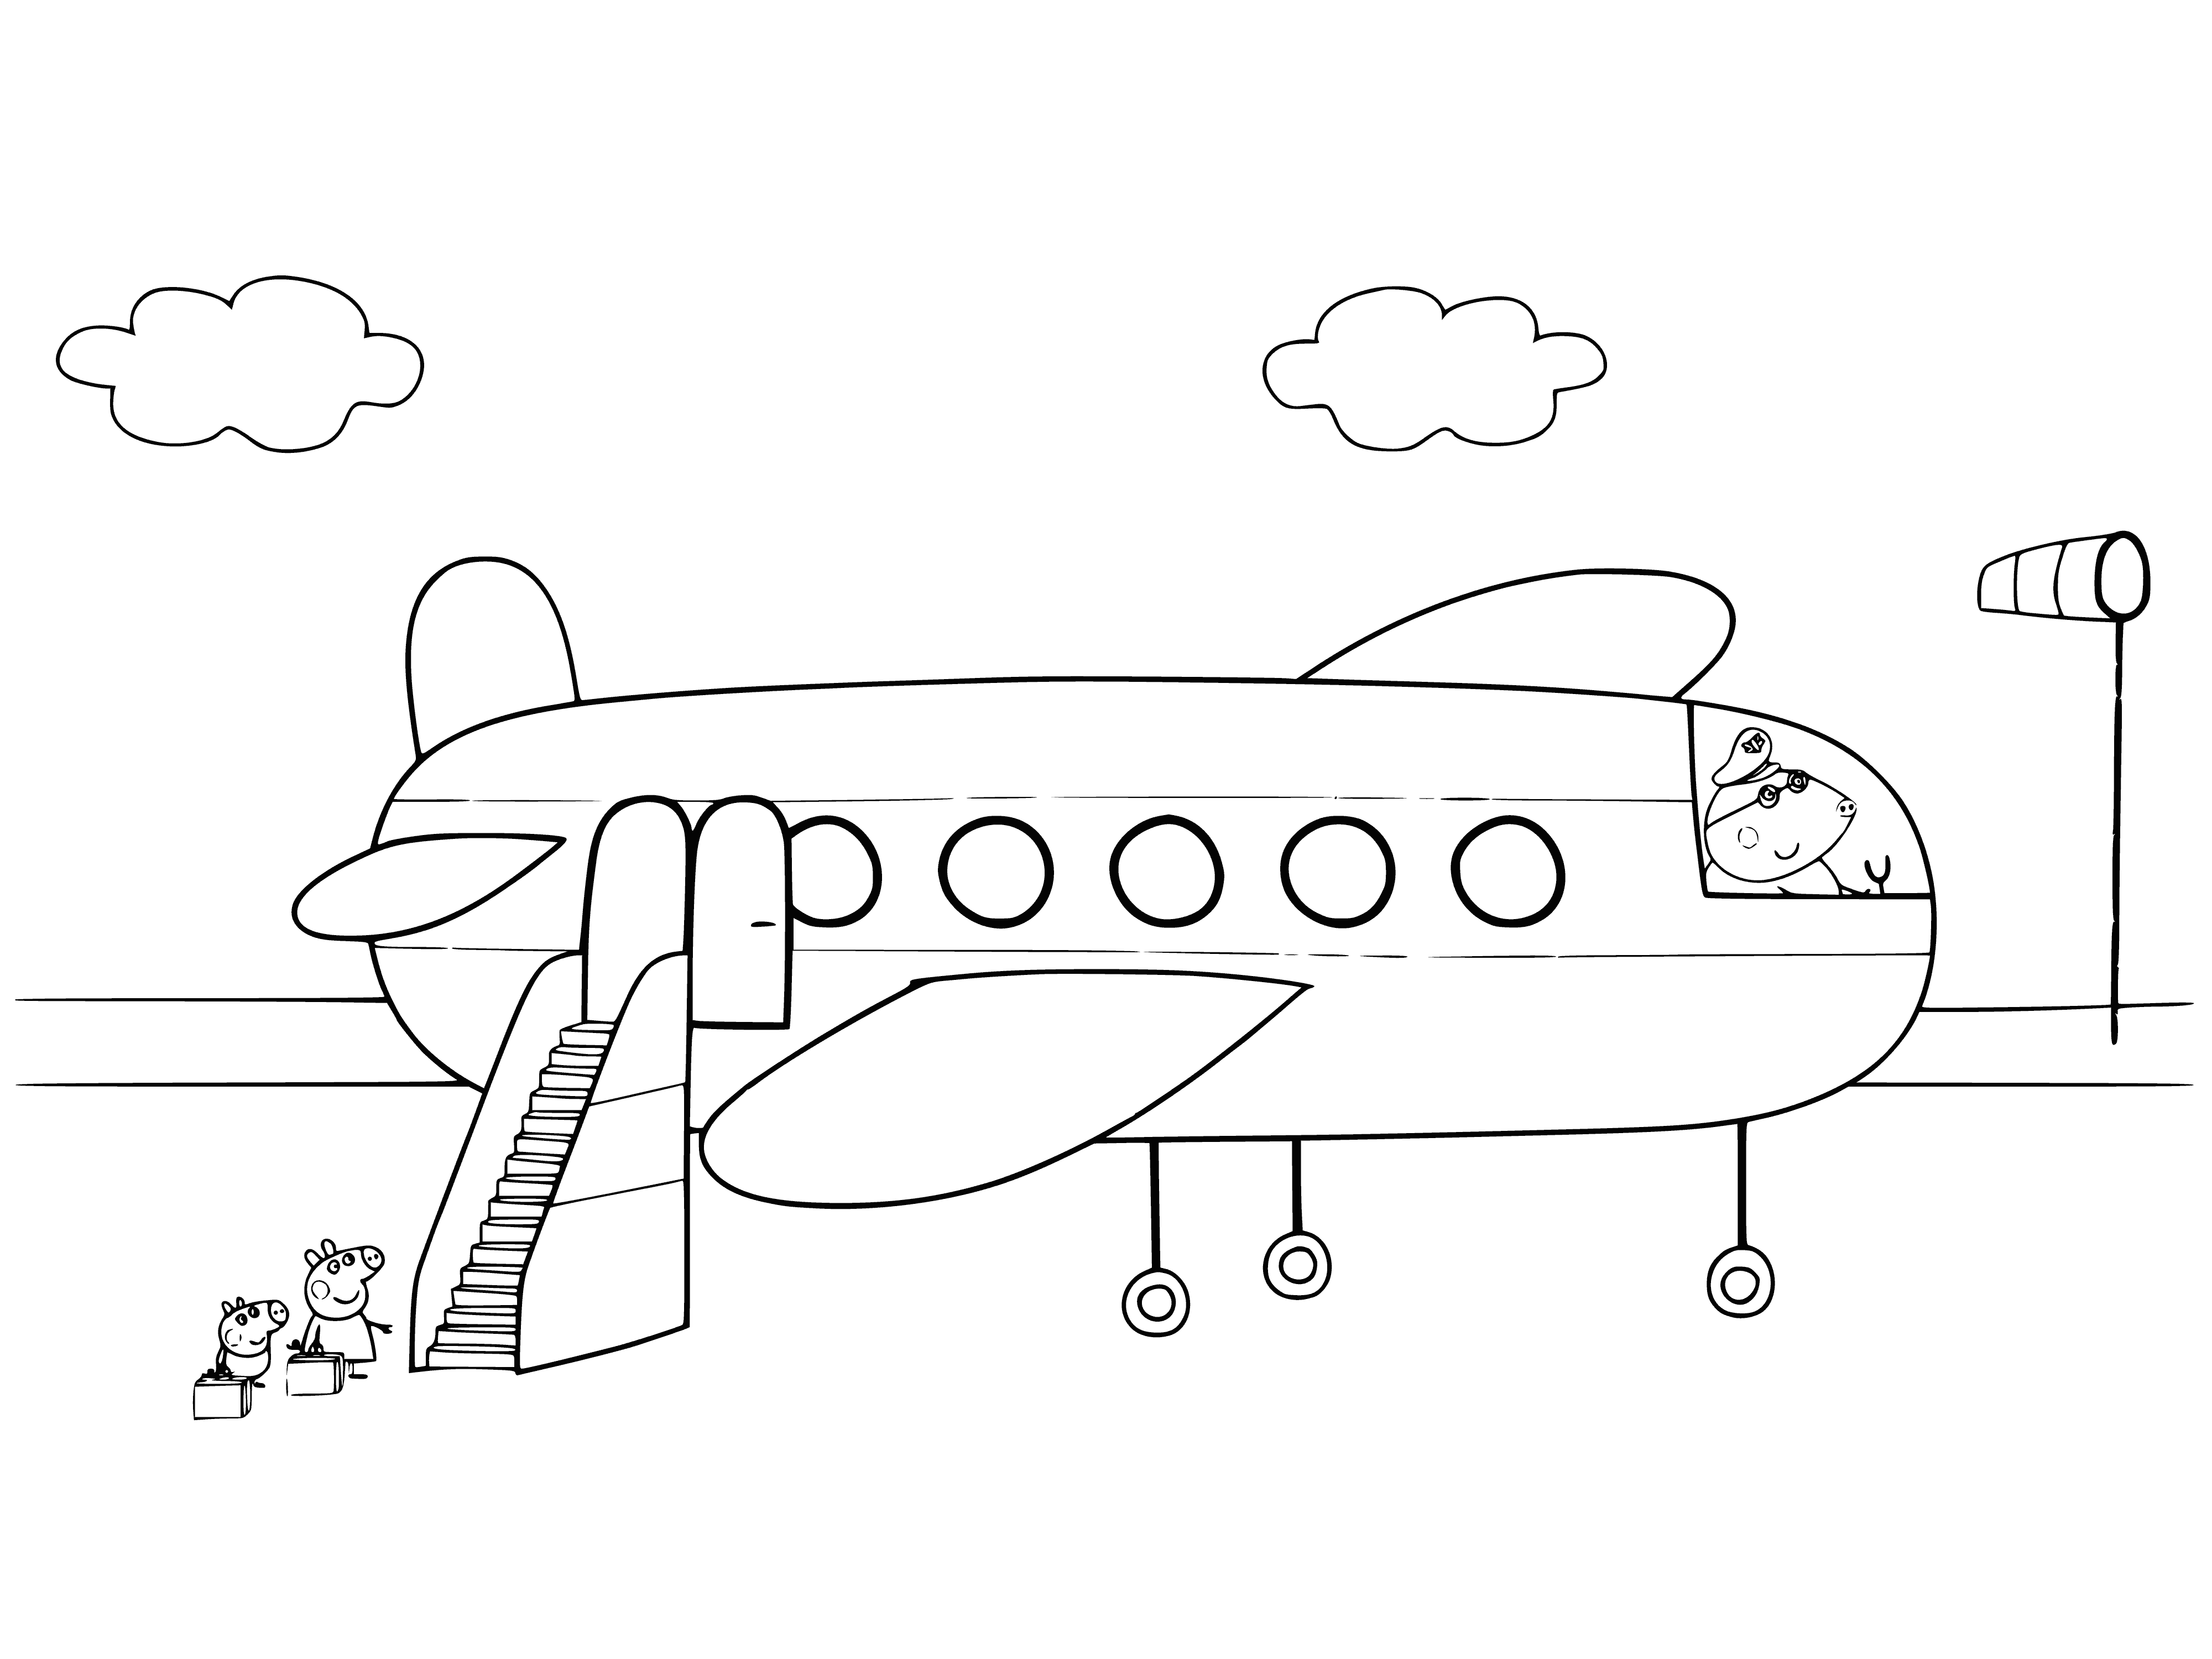 coloring page: Peppa waves goodbye to her friends and boards a plane wearing a pink dress, carrying her backpack.